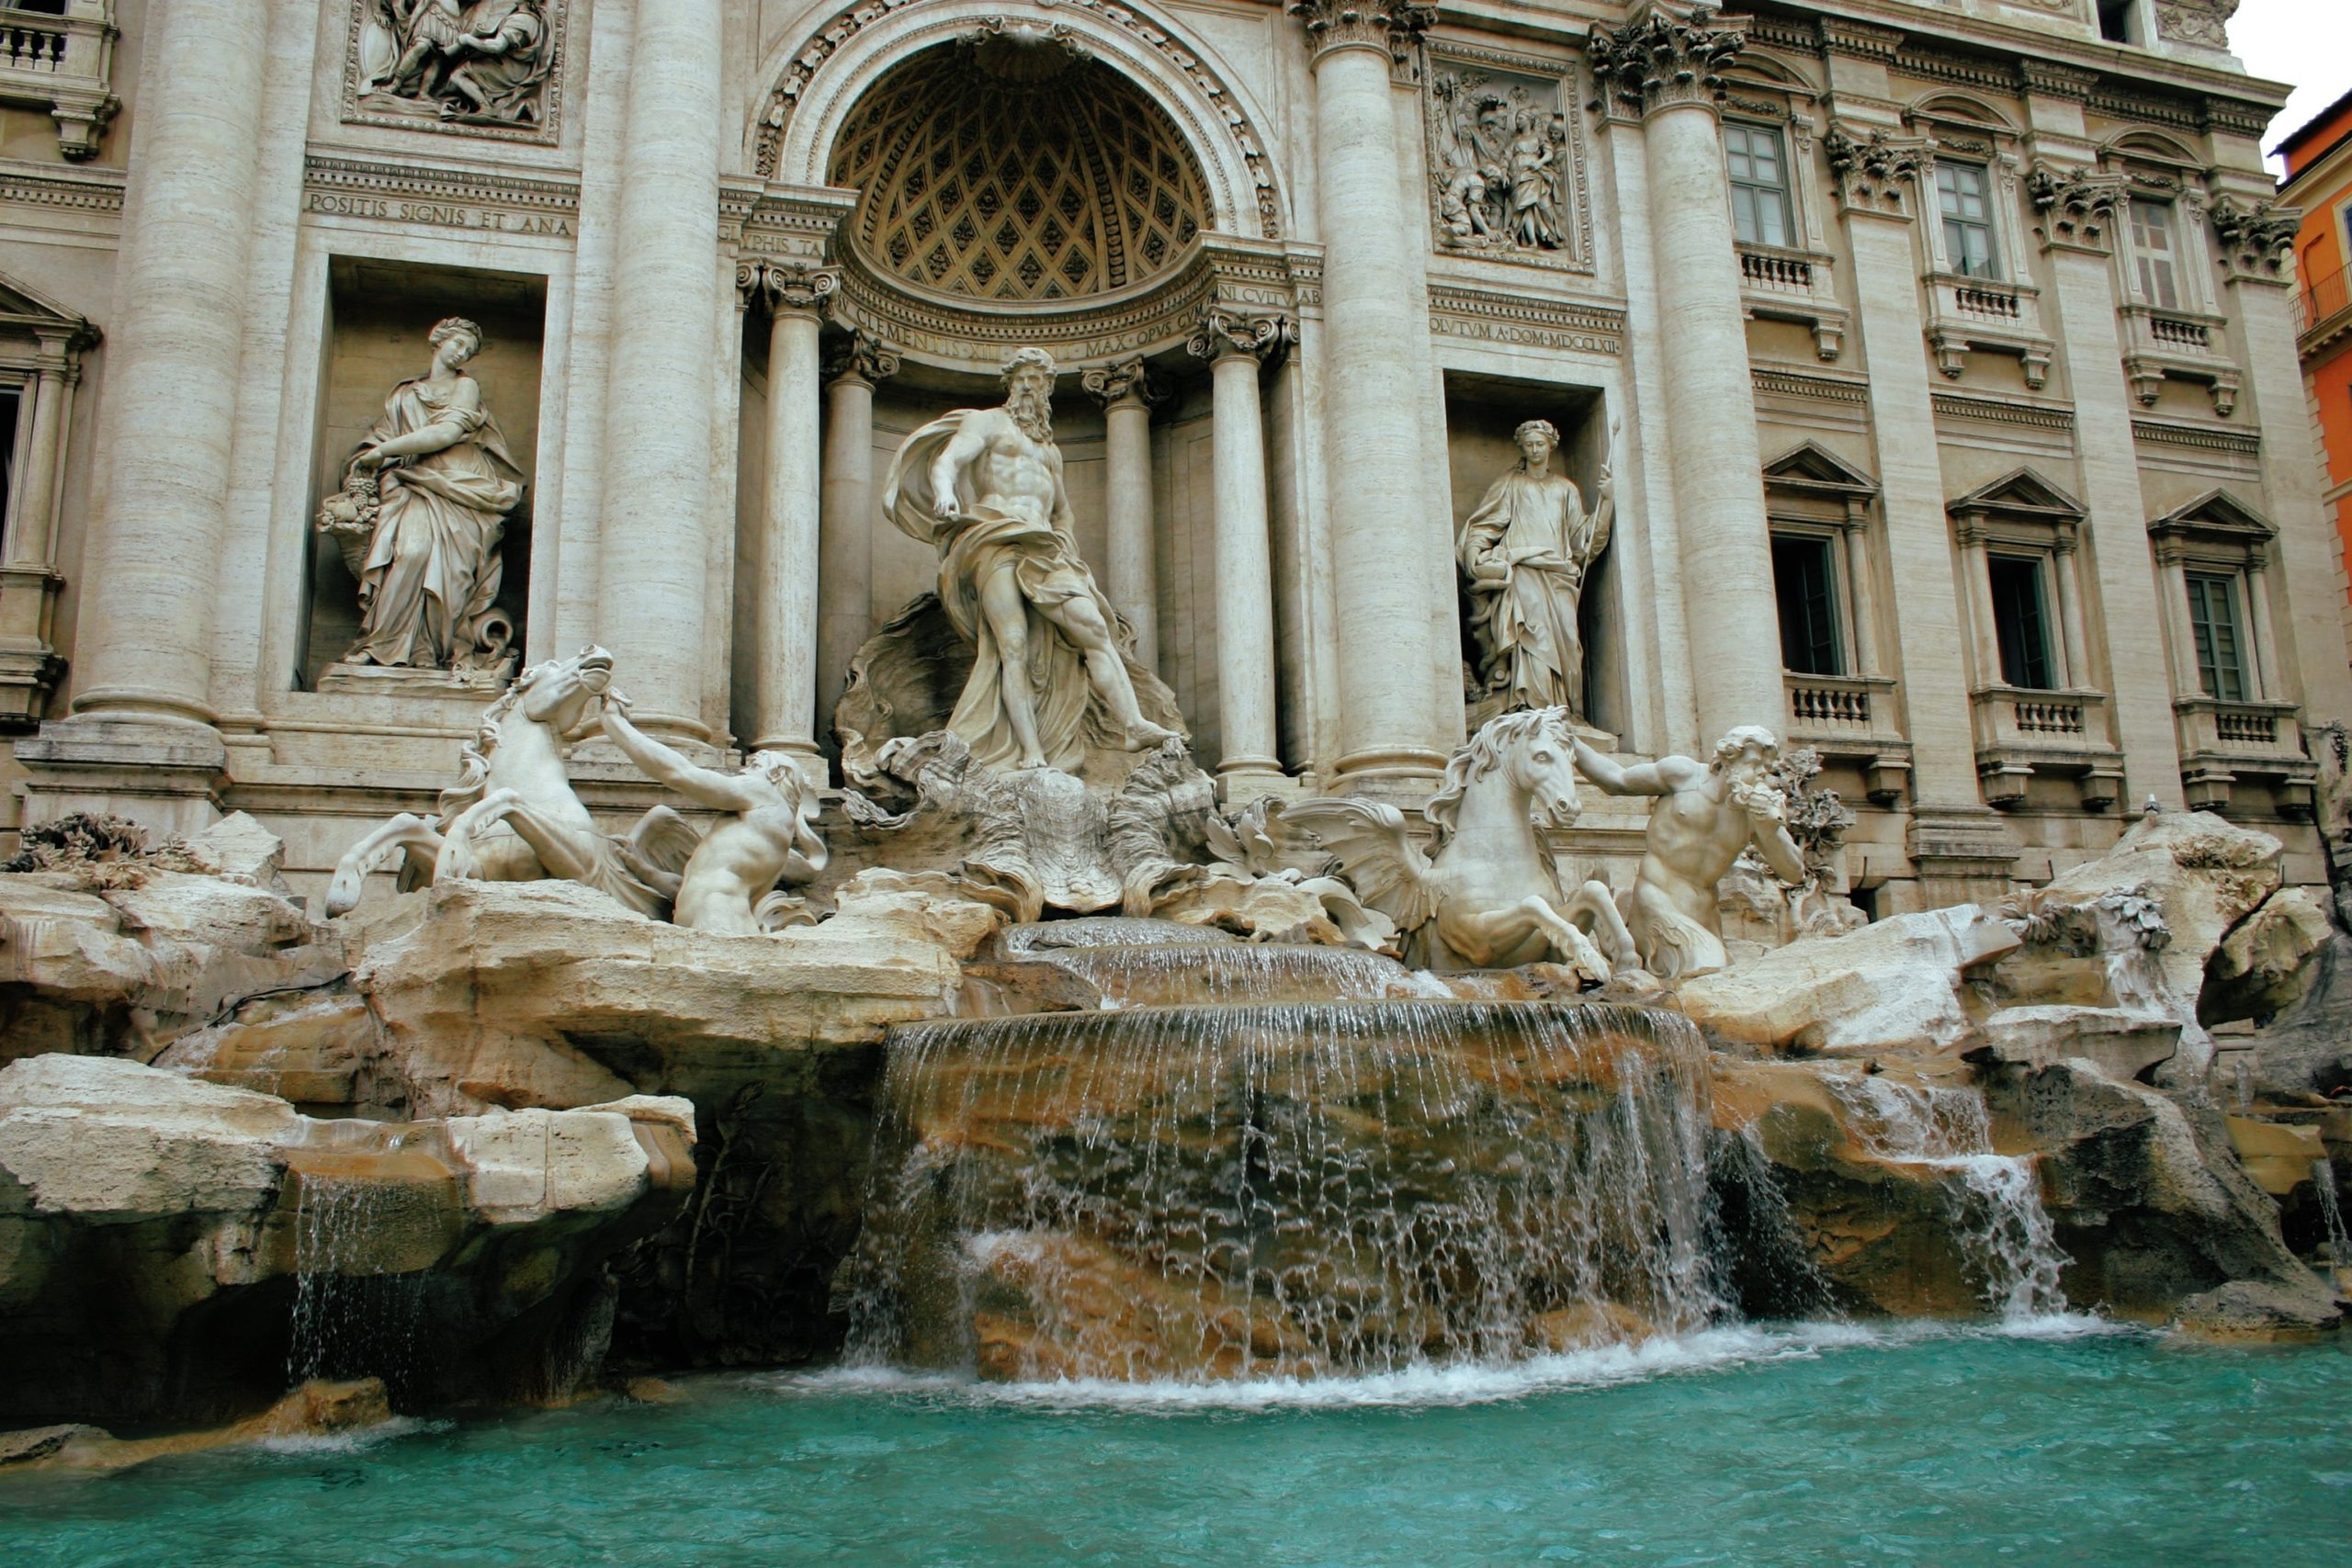 Throwing Coins into Trevi Fountain is Quintessential Rome Experience